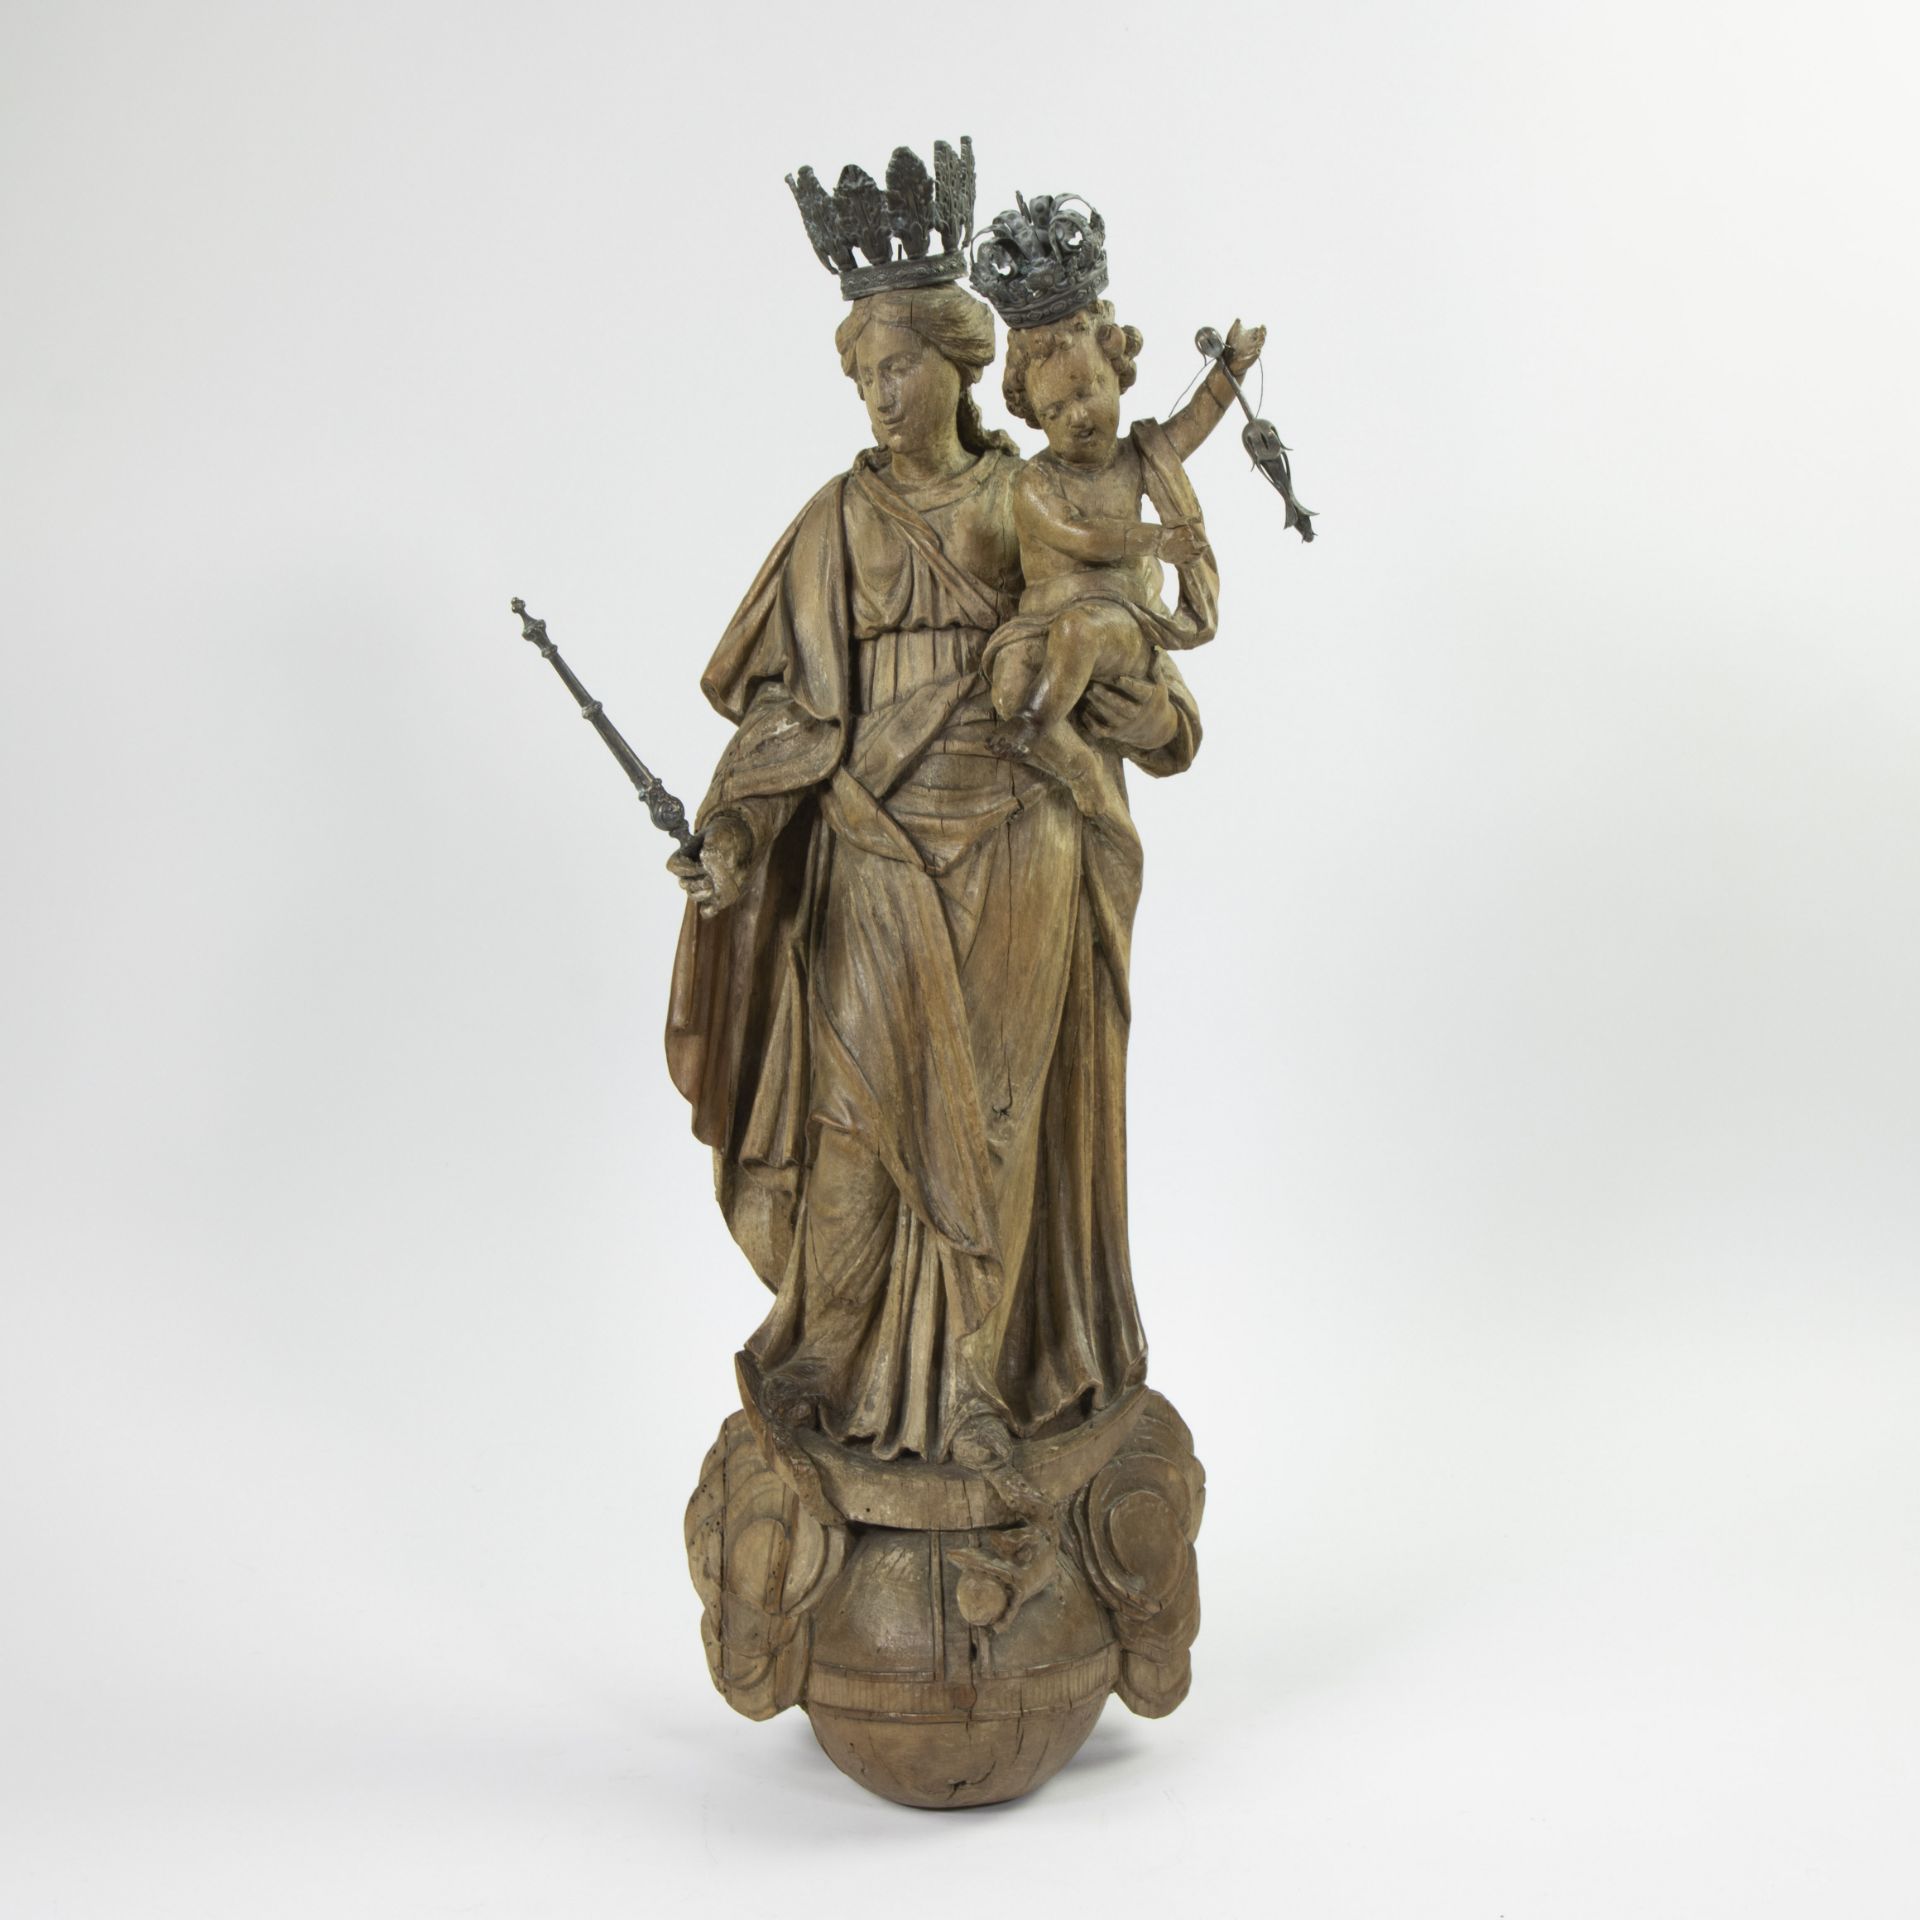 Madonna and child on globe and crescent moon, oak wood, 18th century, traces of polychromy